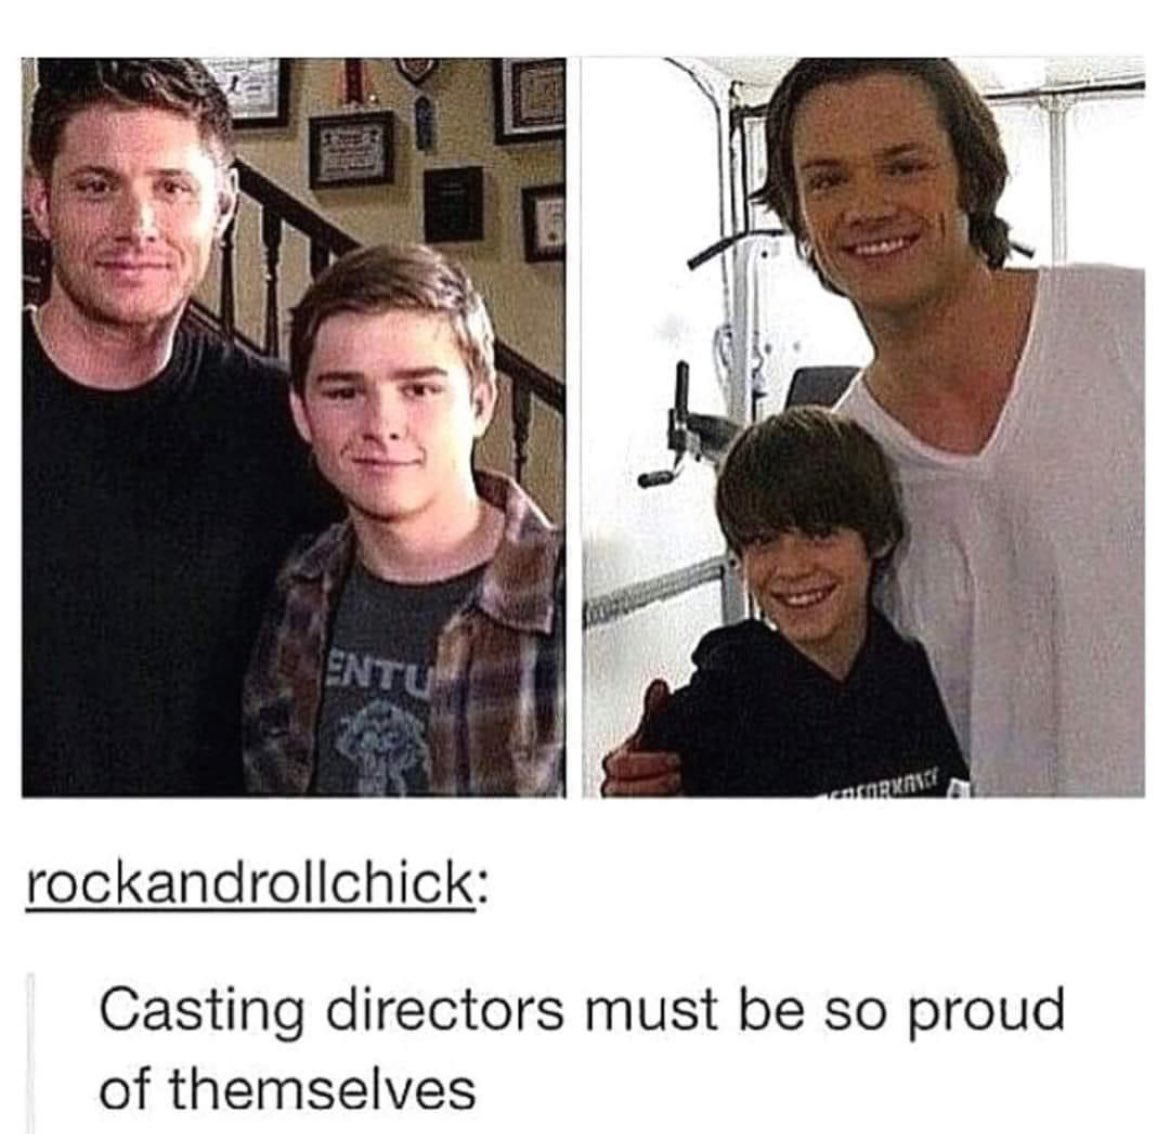 they worked harder on finding a perfect child actor than writing some decent television